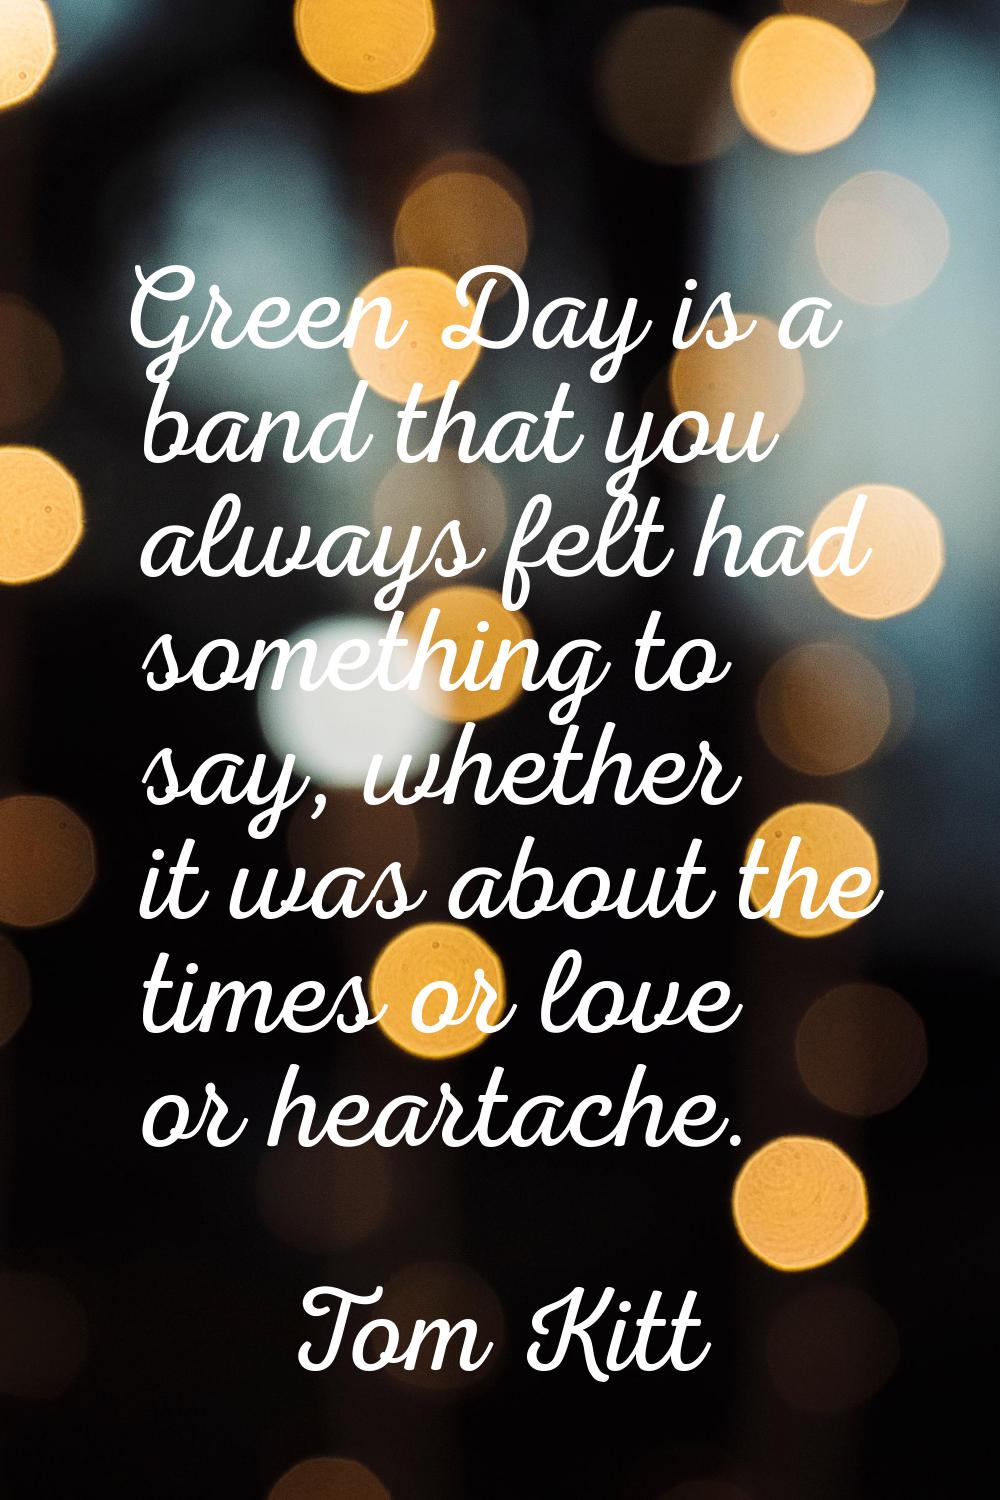 Green Day is a band that you always felt had something to say, whether it was about the times or lo